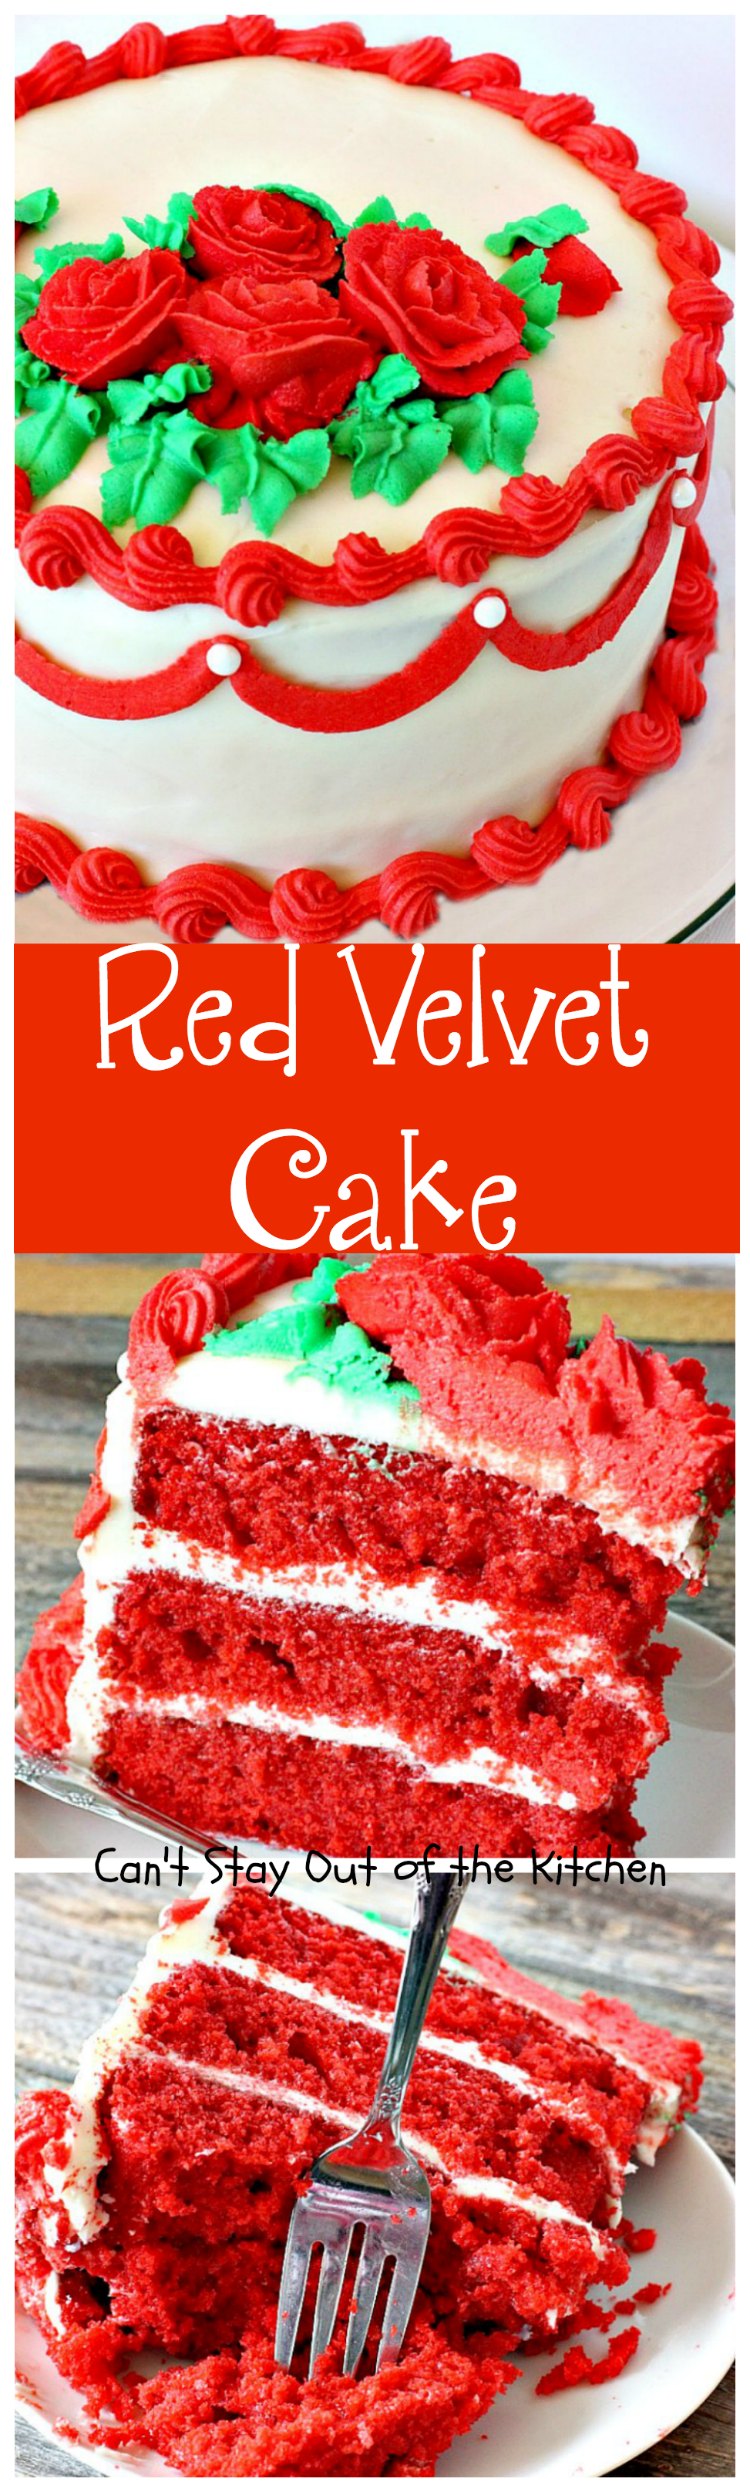 Red Velvet Cake | Can't Stay Out of the Kitchen